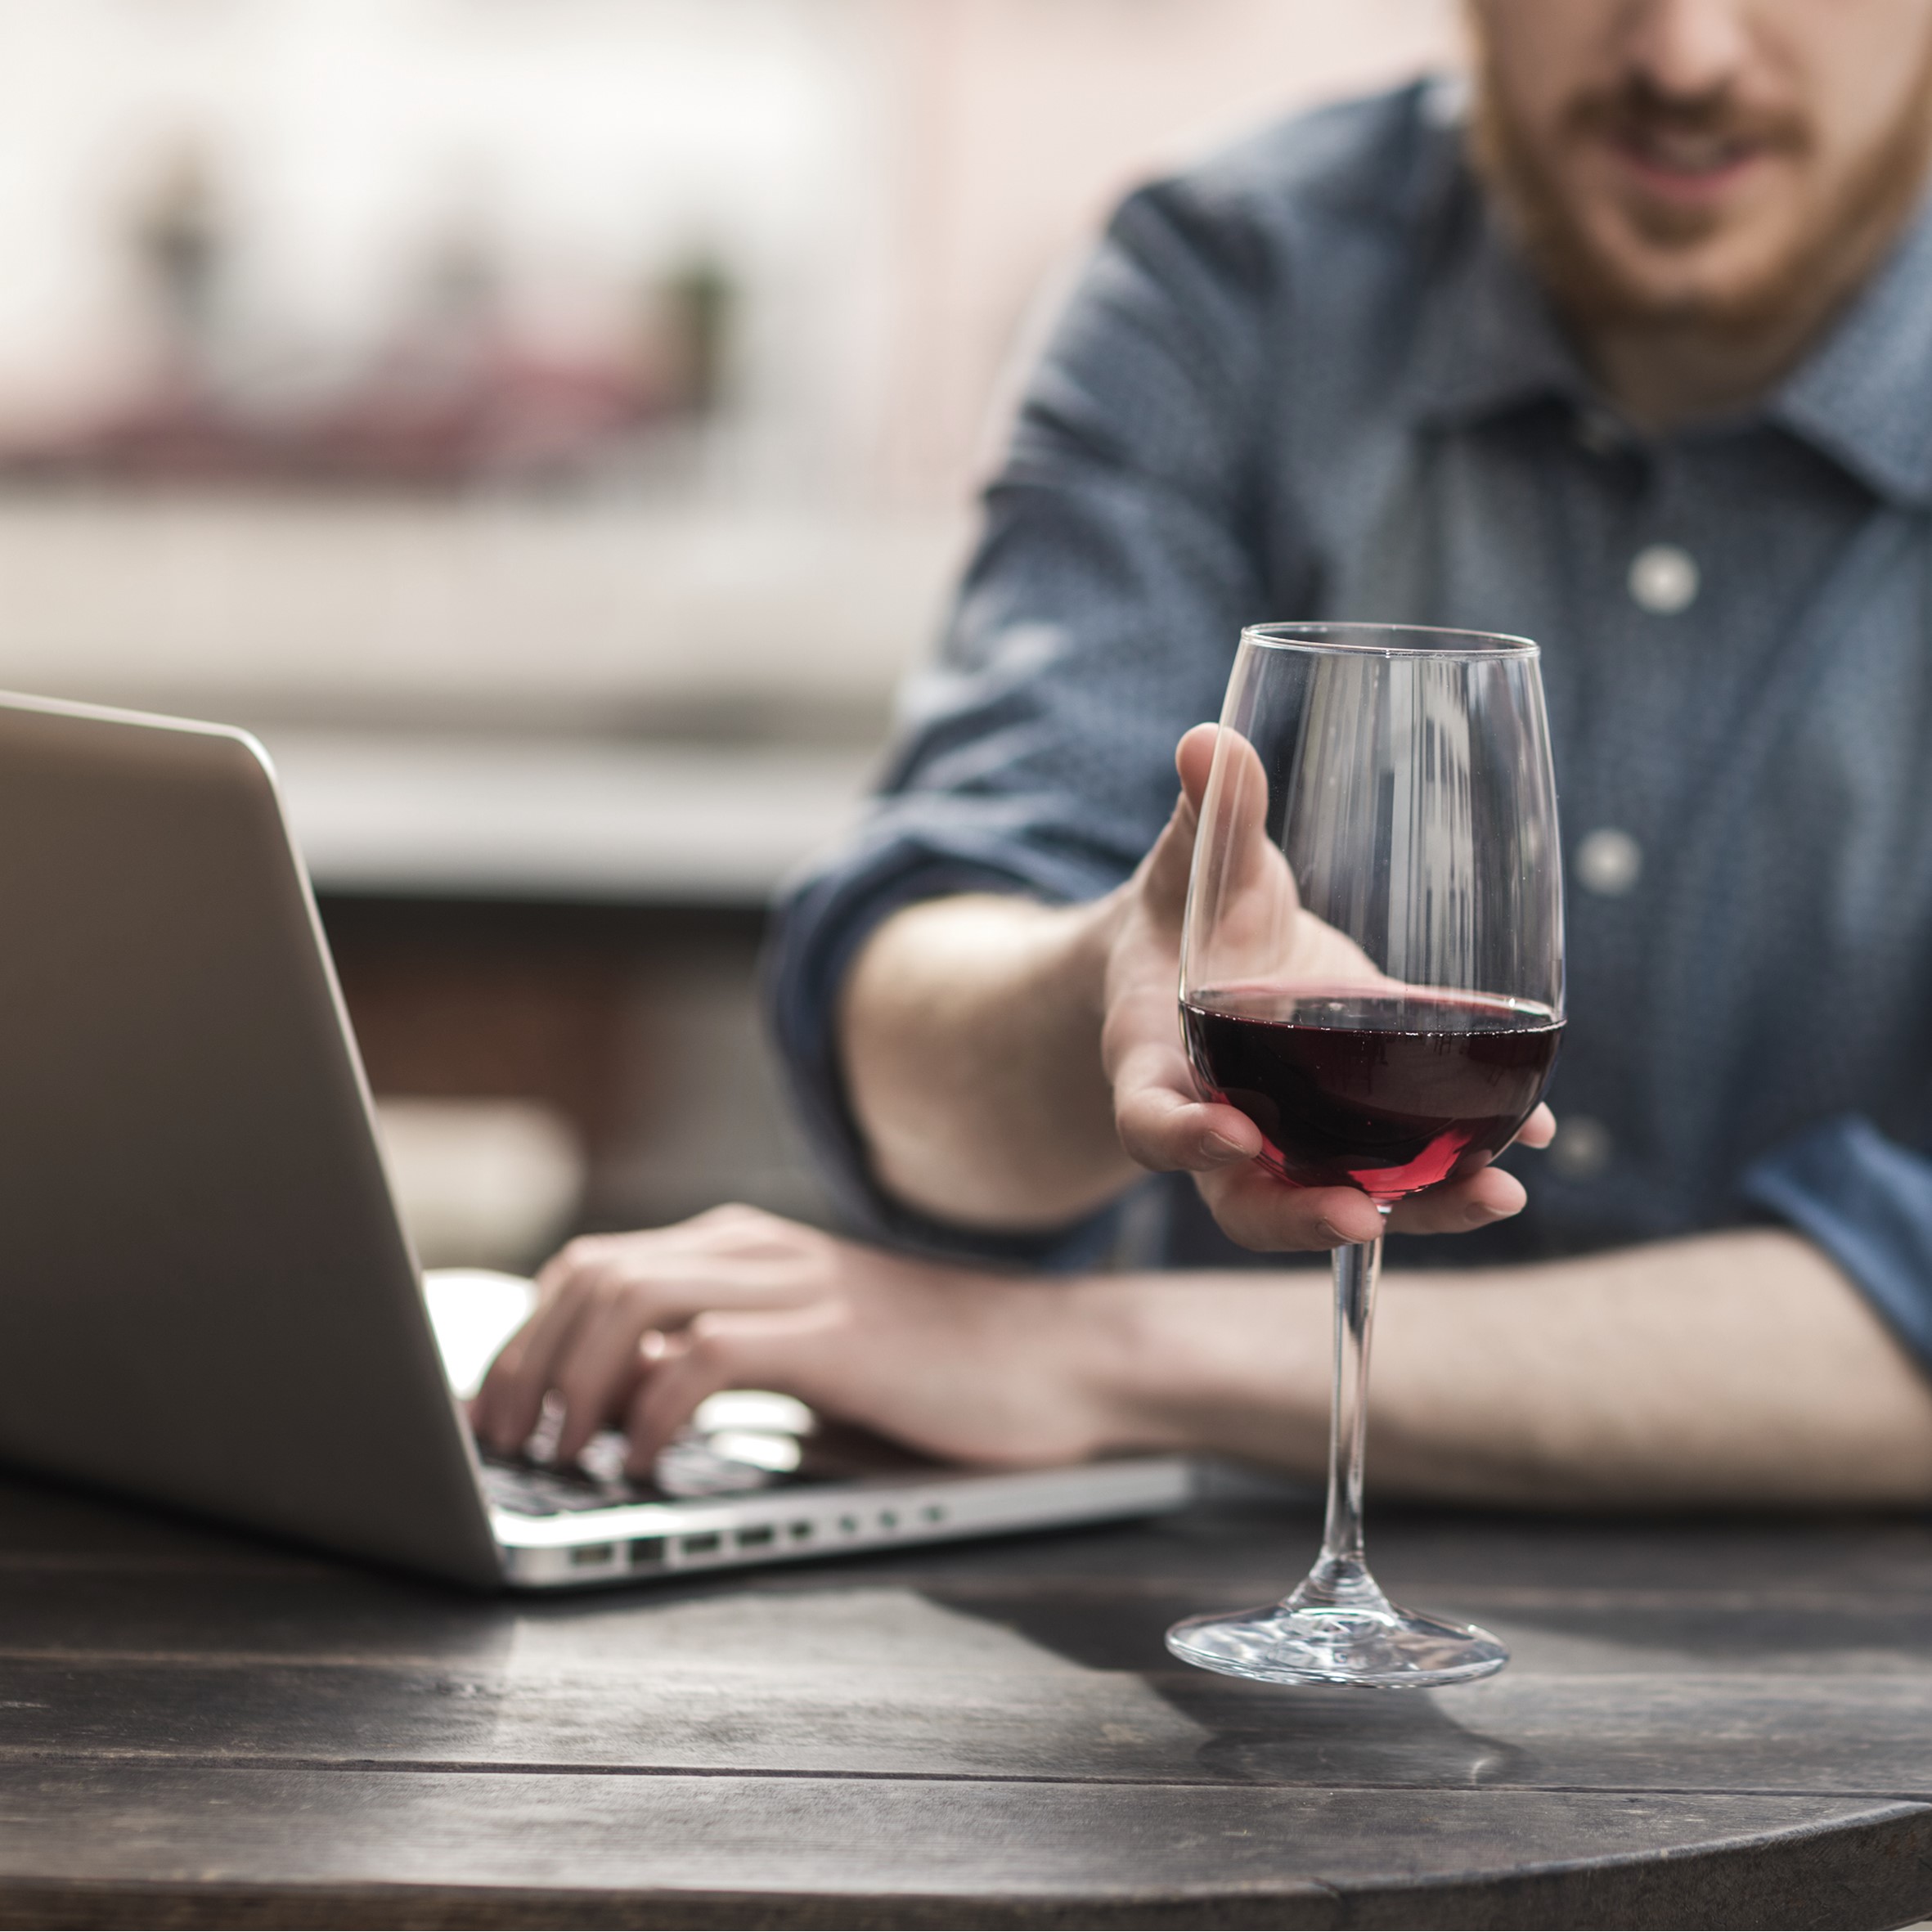 Brazil technology 2 - EXCLUSIVE AND TAILORED OFFERS ARE KEY DRIVERS OF ONLINE WINE PURCHASING FOR MILLENNIAL DRINKERS